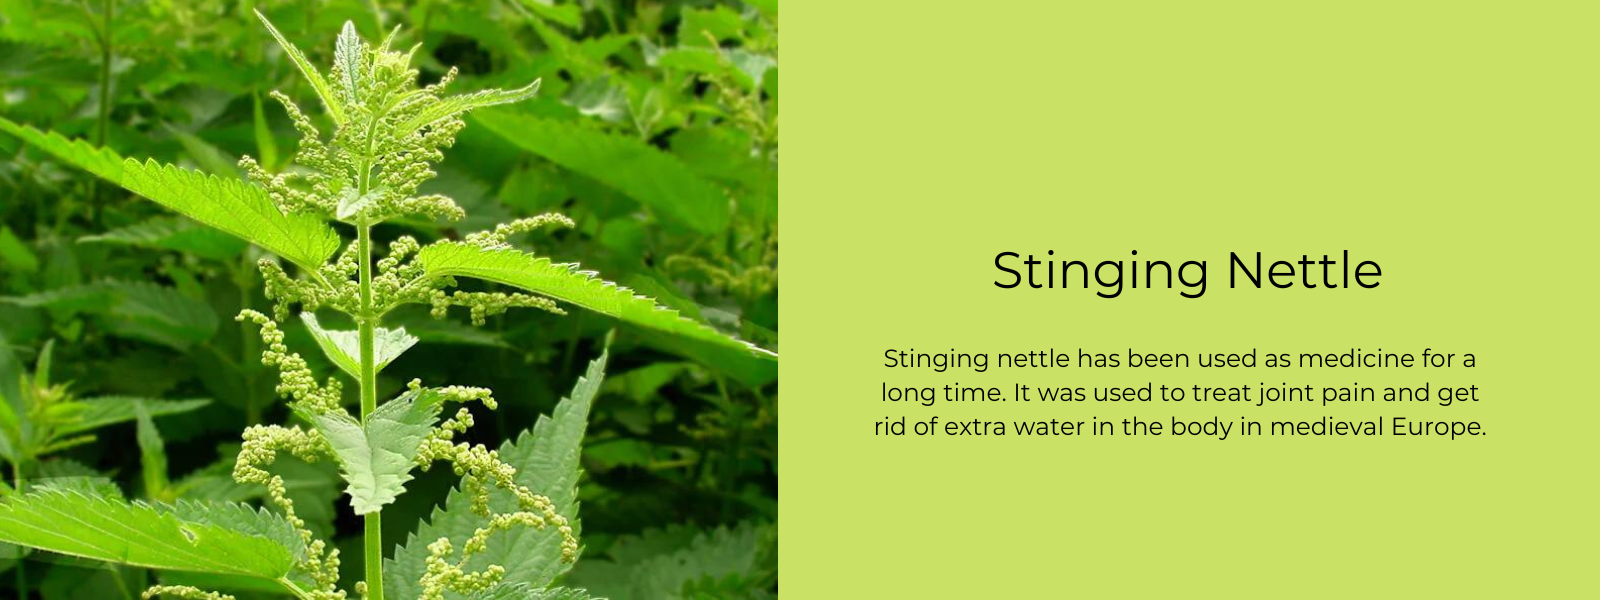 Stinging Nettle - Herbs Benefits, Uses and Important Facts